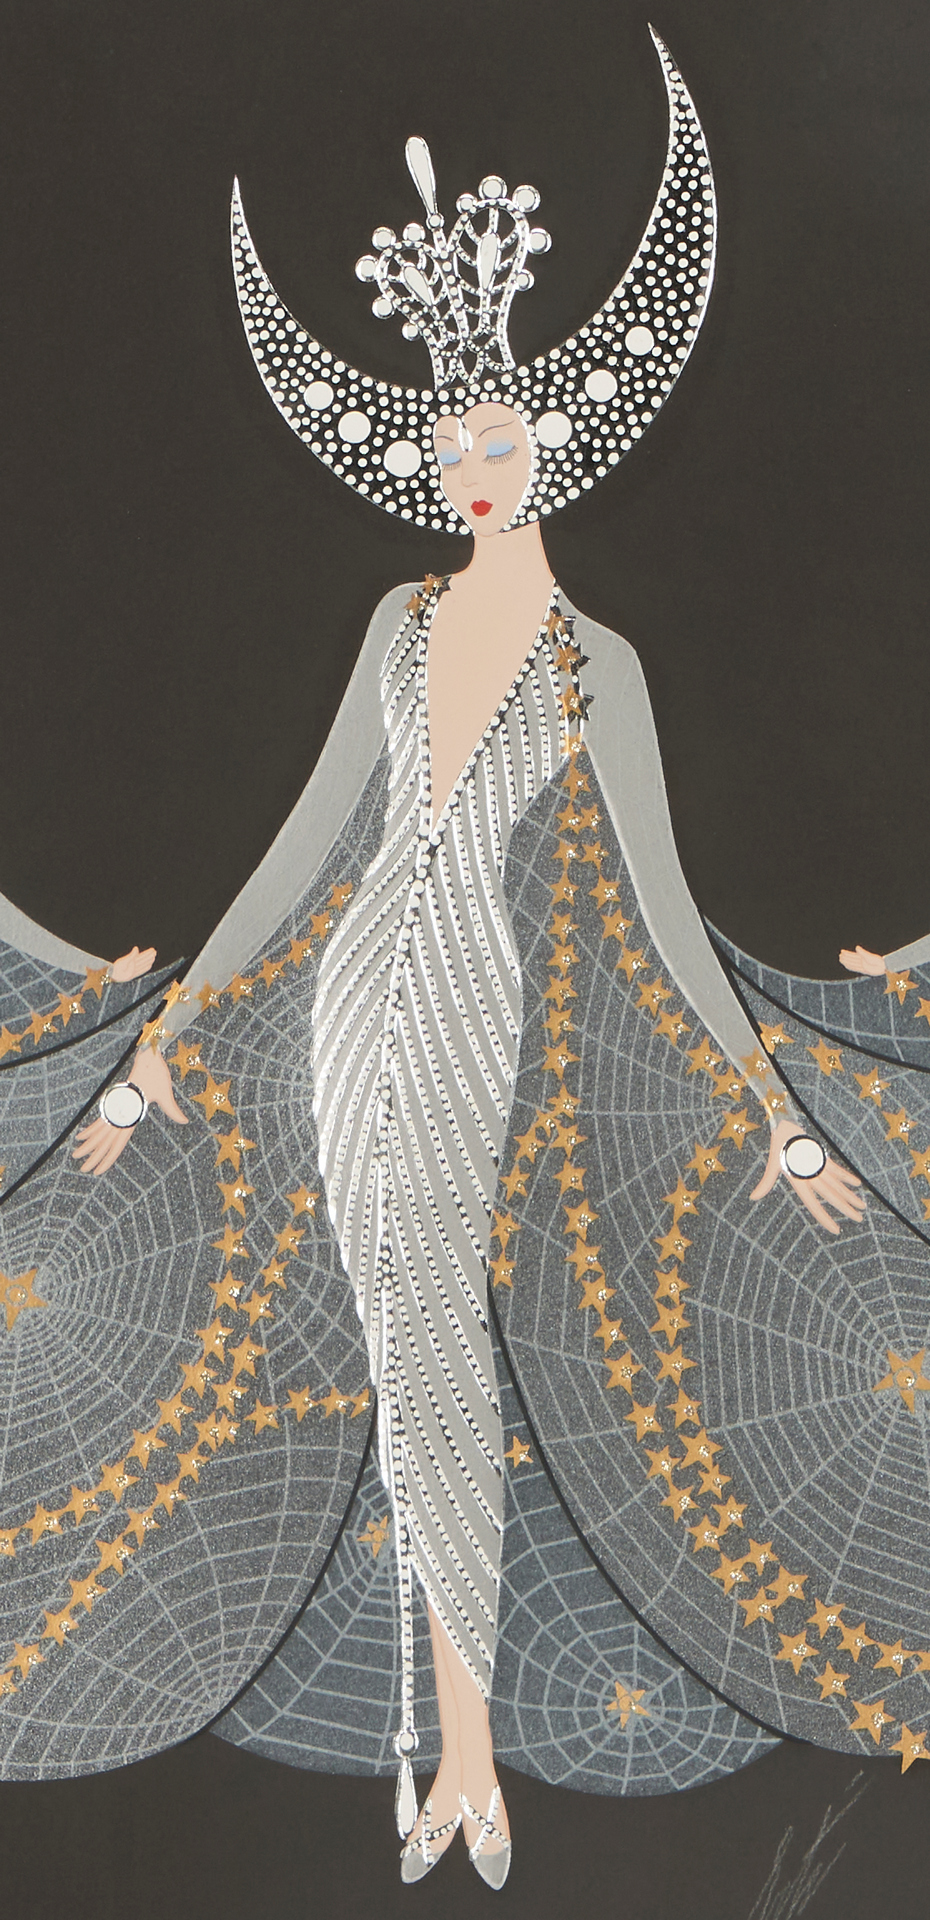 Erté (Romain De Tirtoff, Russian-French, 1892-1990) :: Color serigraph with silver and gold foil embossing titled "Queen of the Night", numbered "PP 1/1", 1985. (DETATIL)